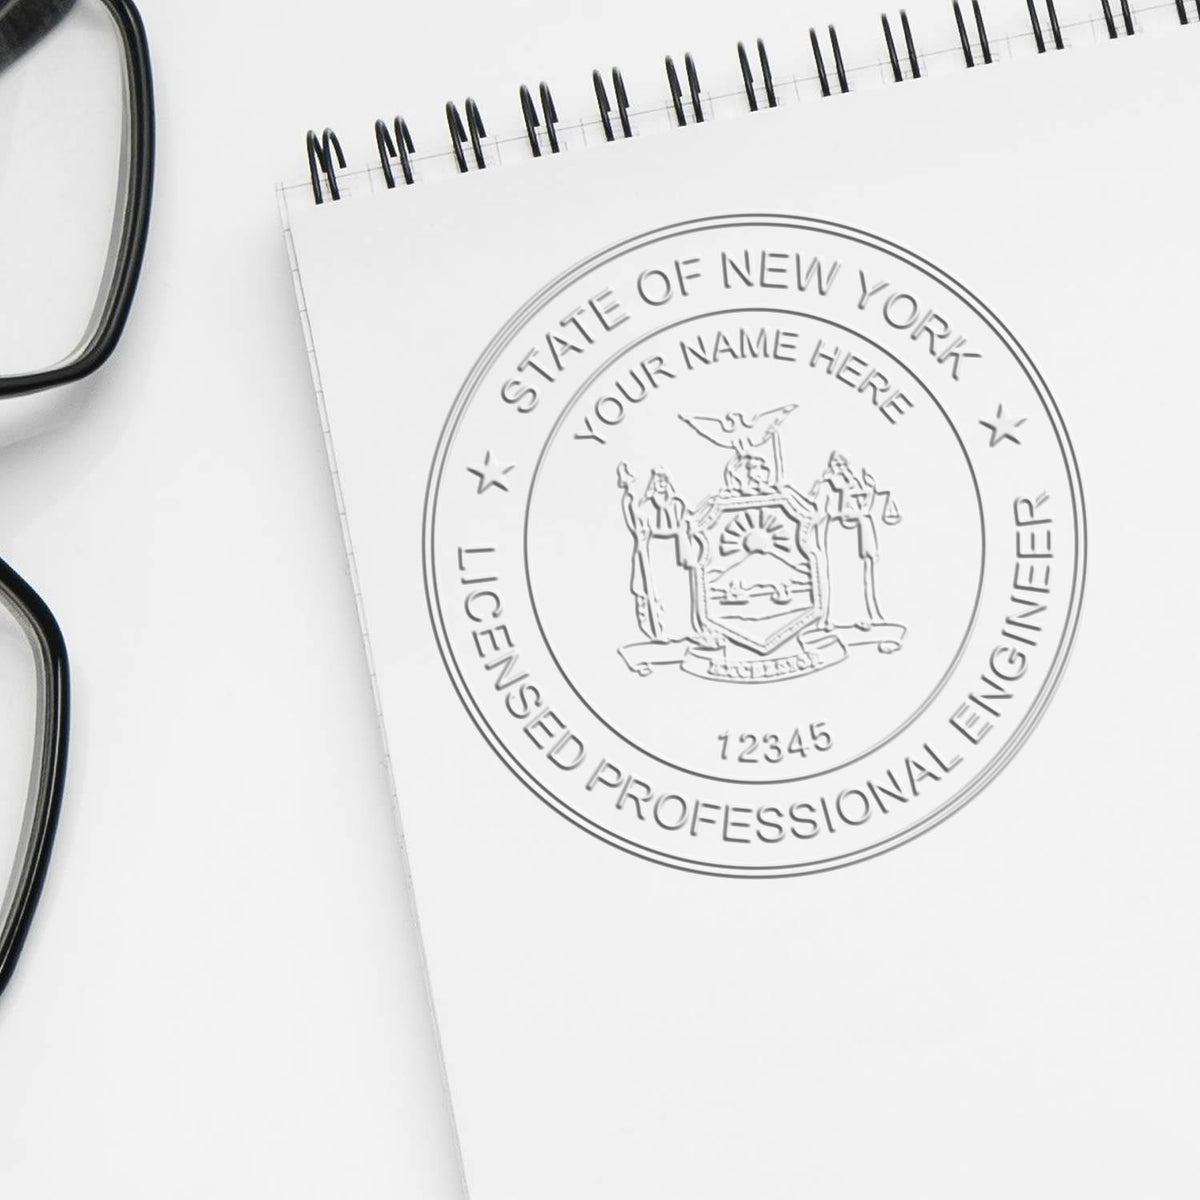 A stamped imprint of the Gift New York Engineer Seal in this stylish lifestyle photo, setting the tone for a unique and personalized product.